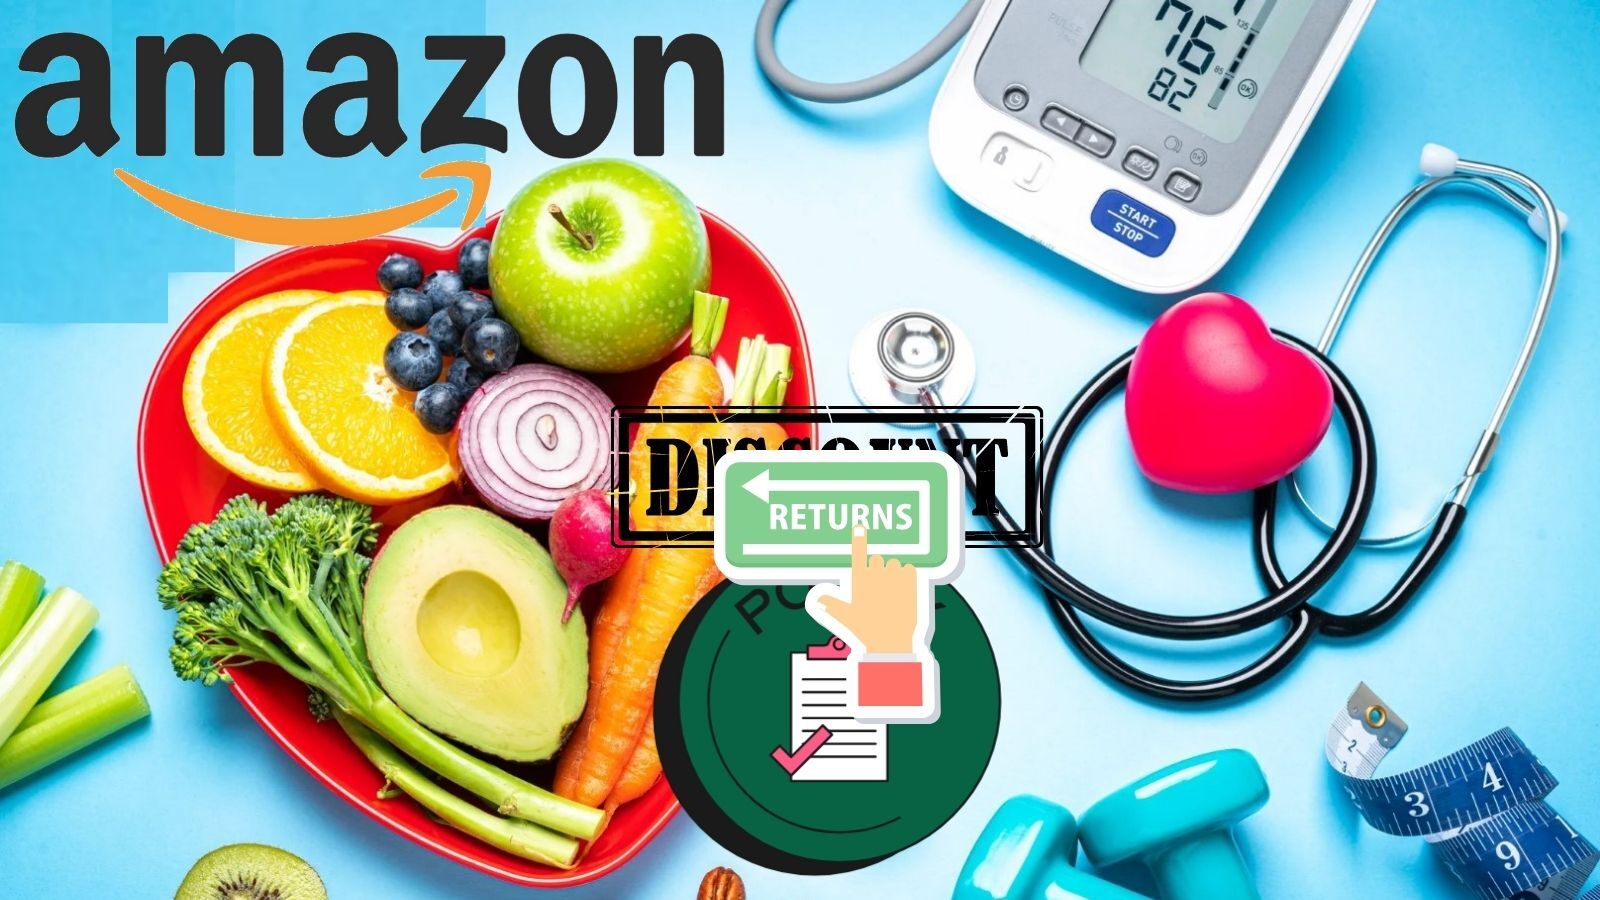 Amazon Medicaid Discount (How You Can Save, How to Get It, and More)